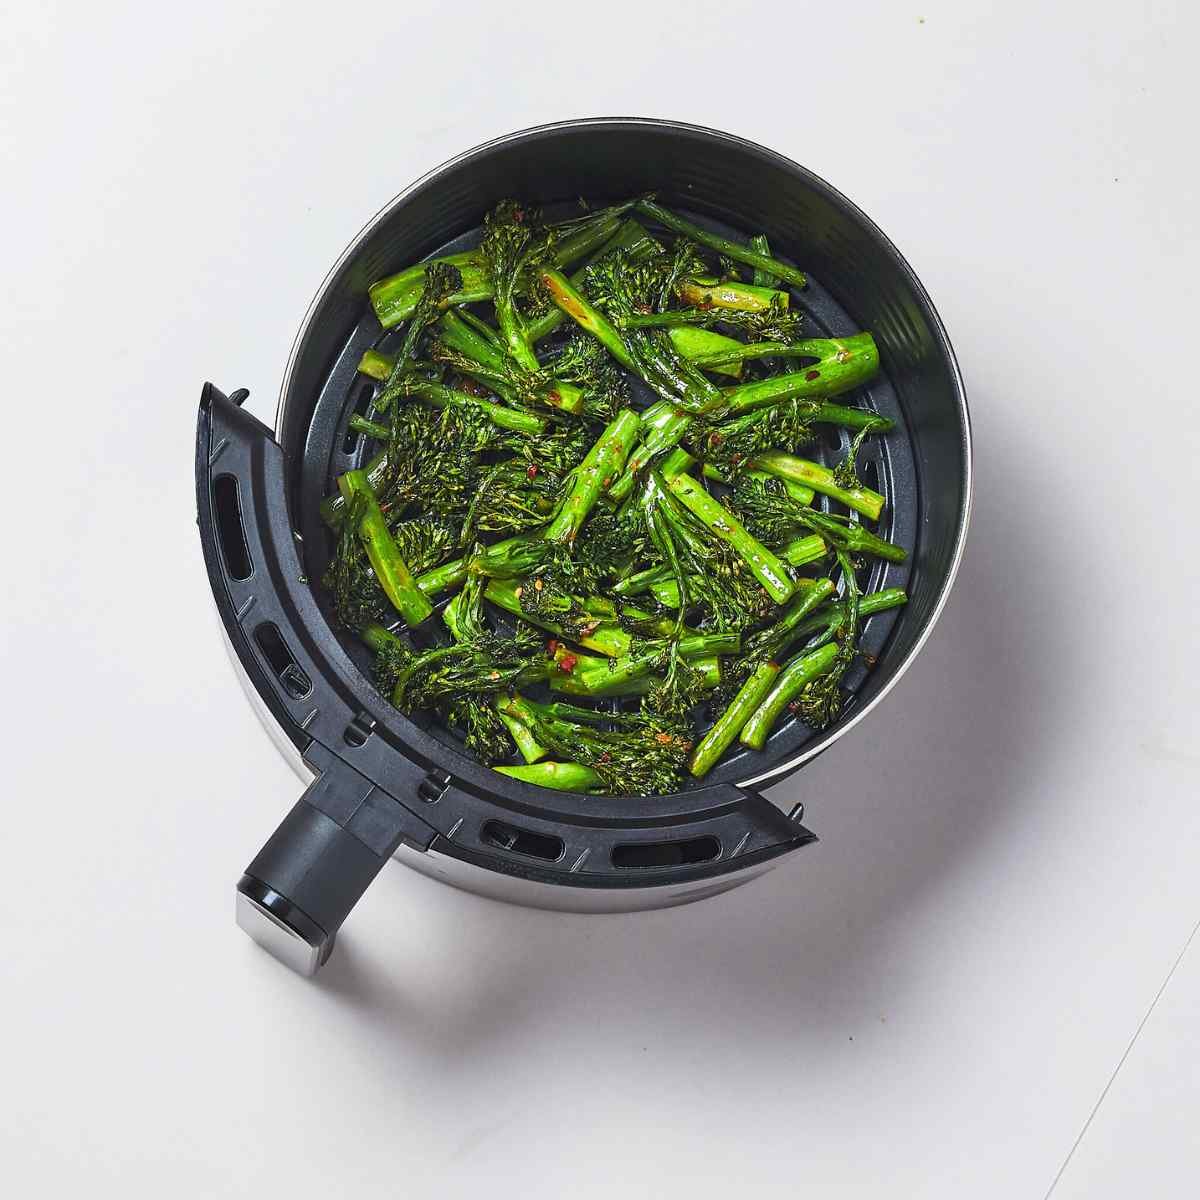 Air-fryer-vegetable-kits-featuring-Broccolini.